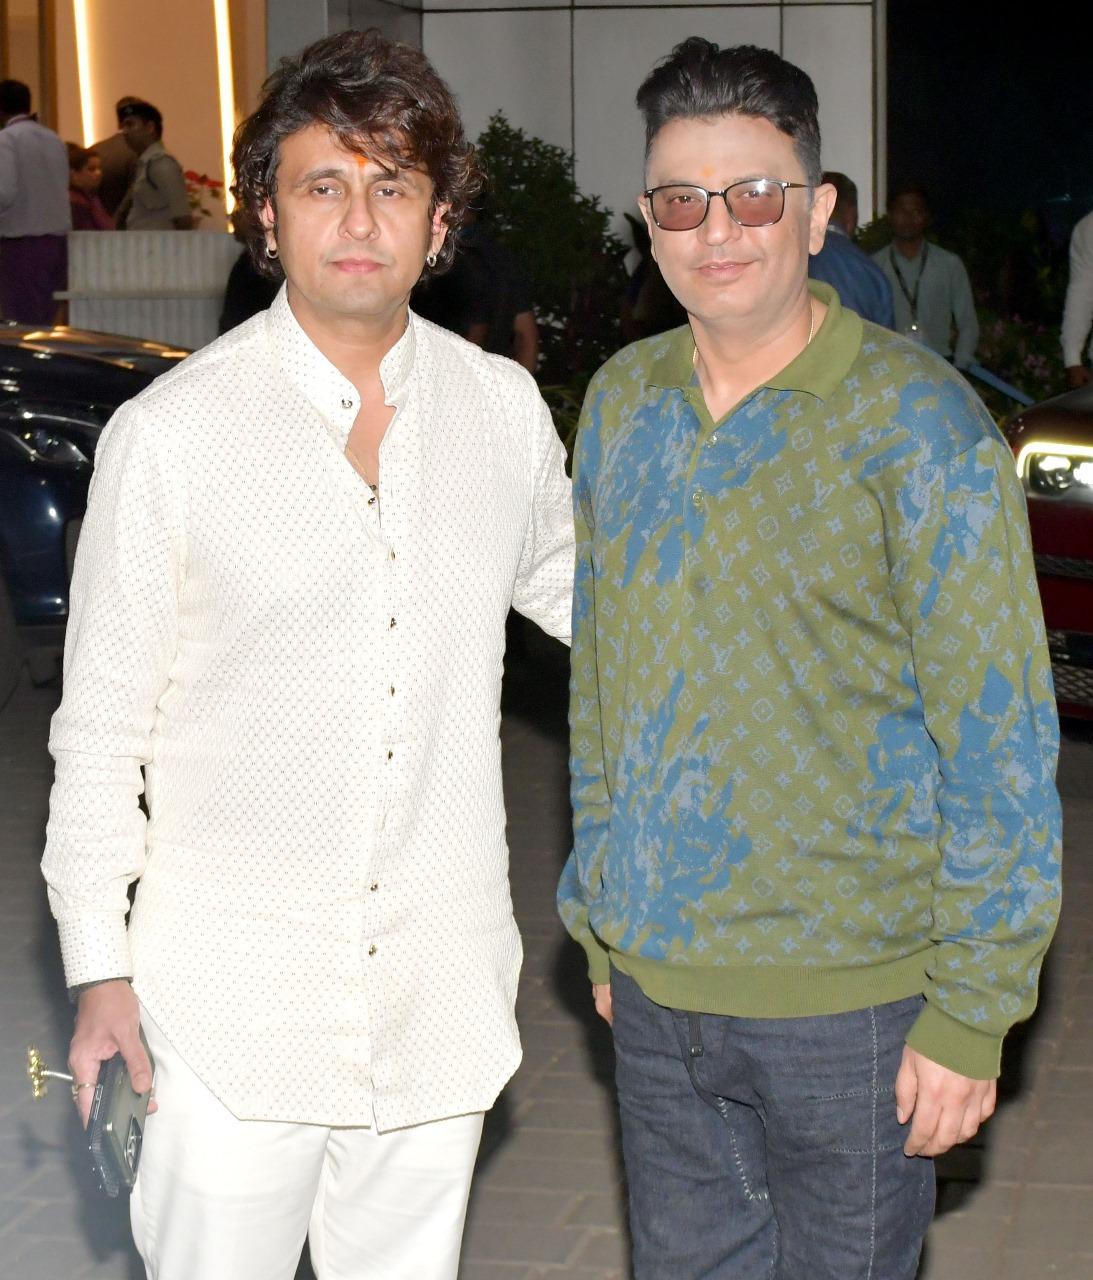 Sonu Nigam and Bhushan Kumar were clicked together at the Kalina airport as they returned from Ayodhya